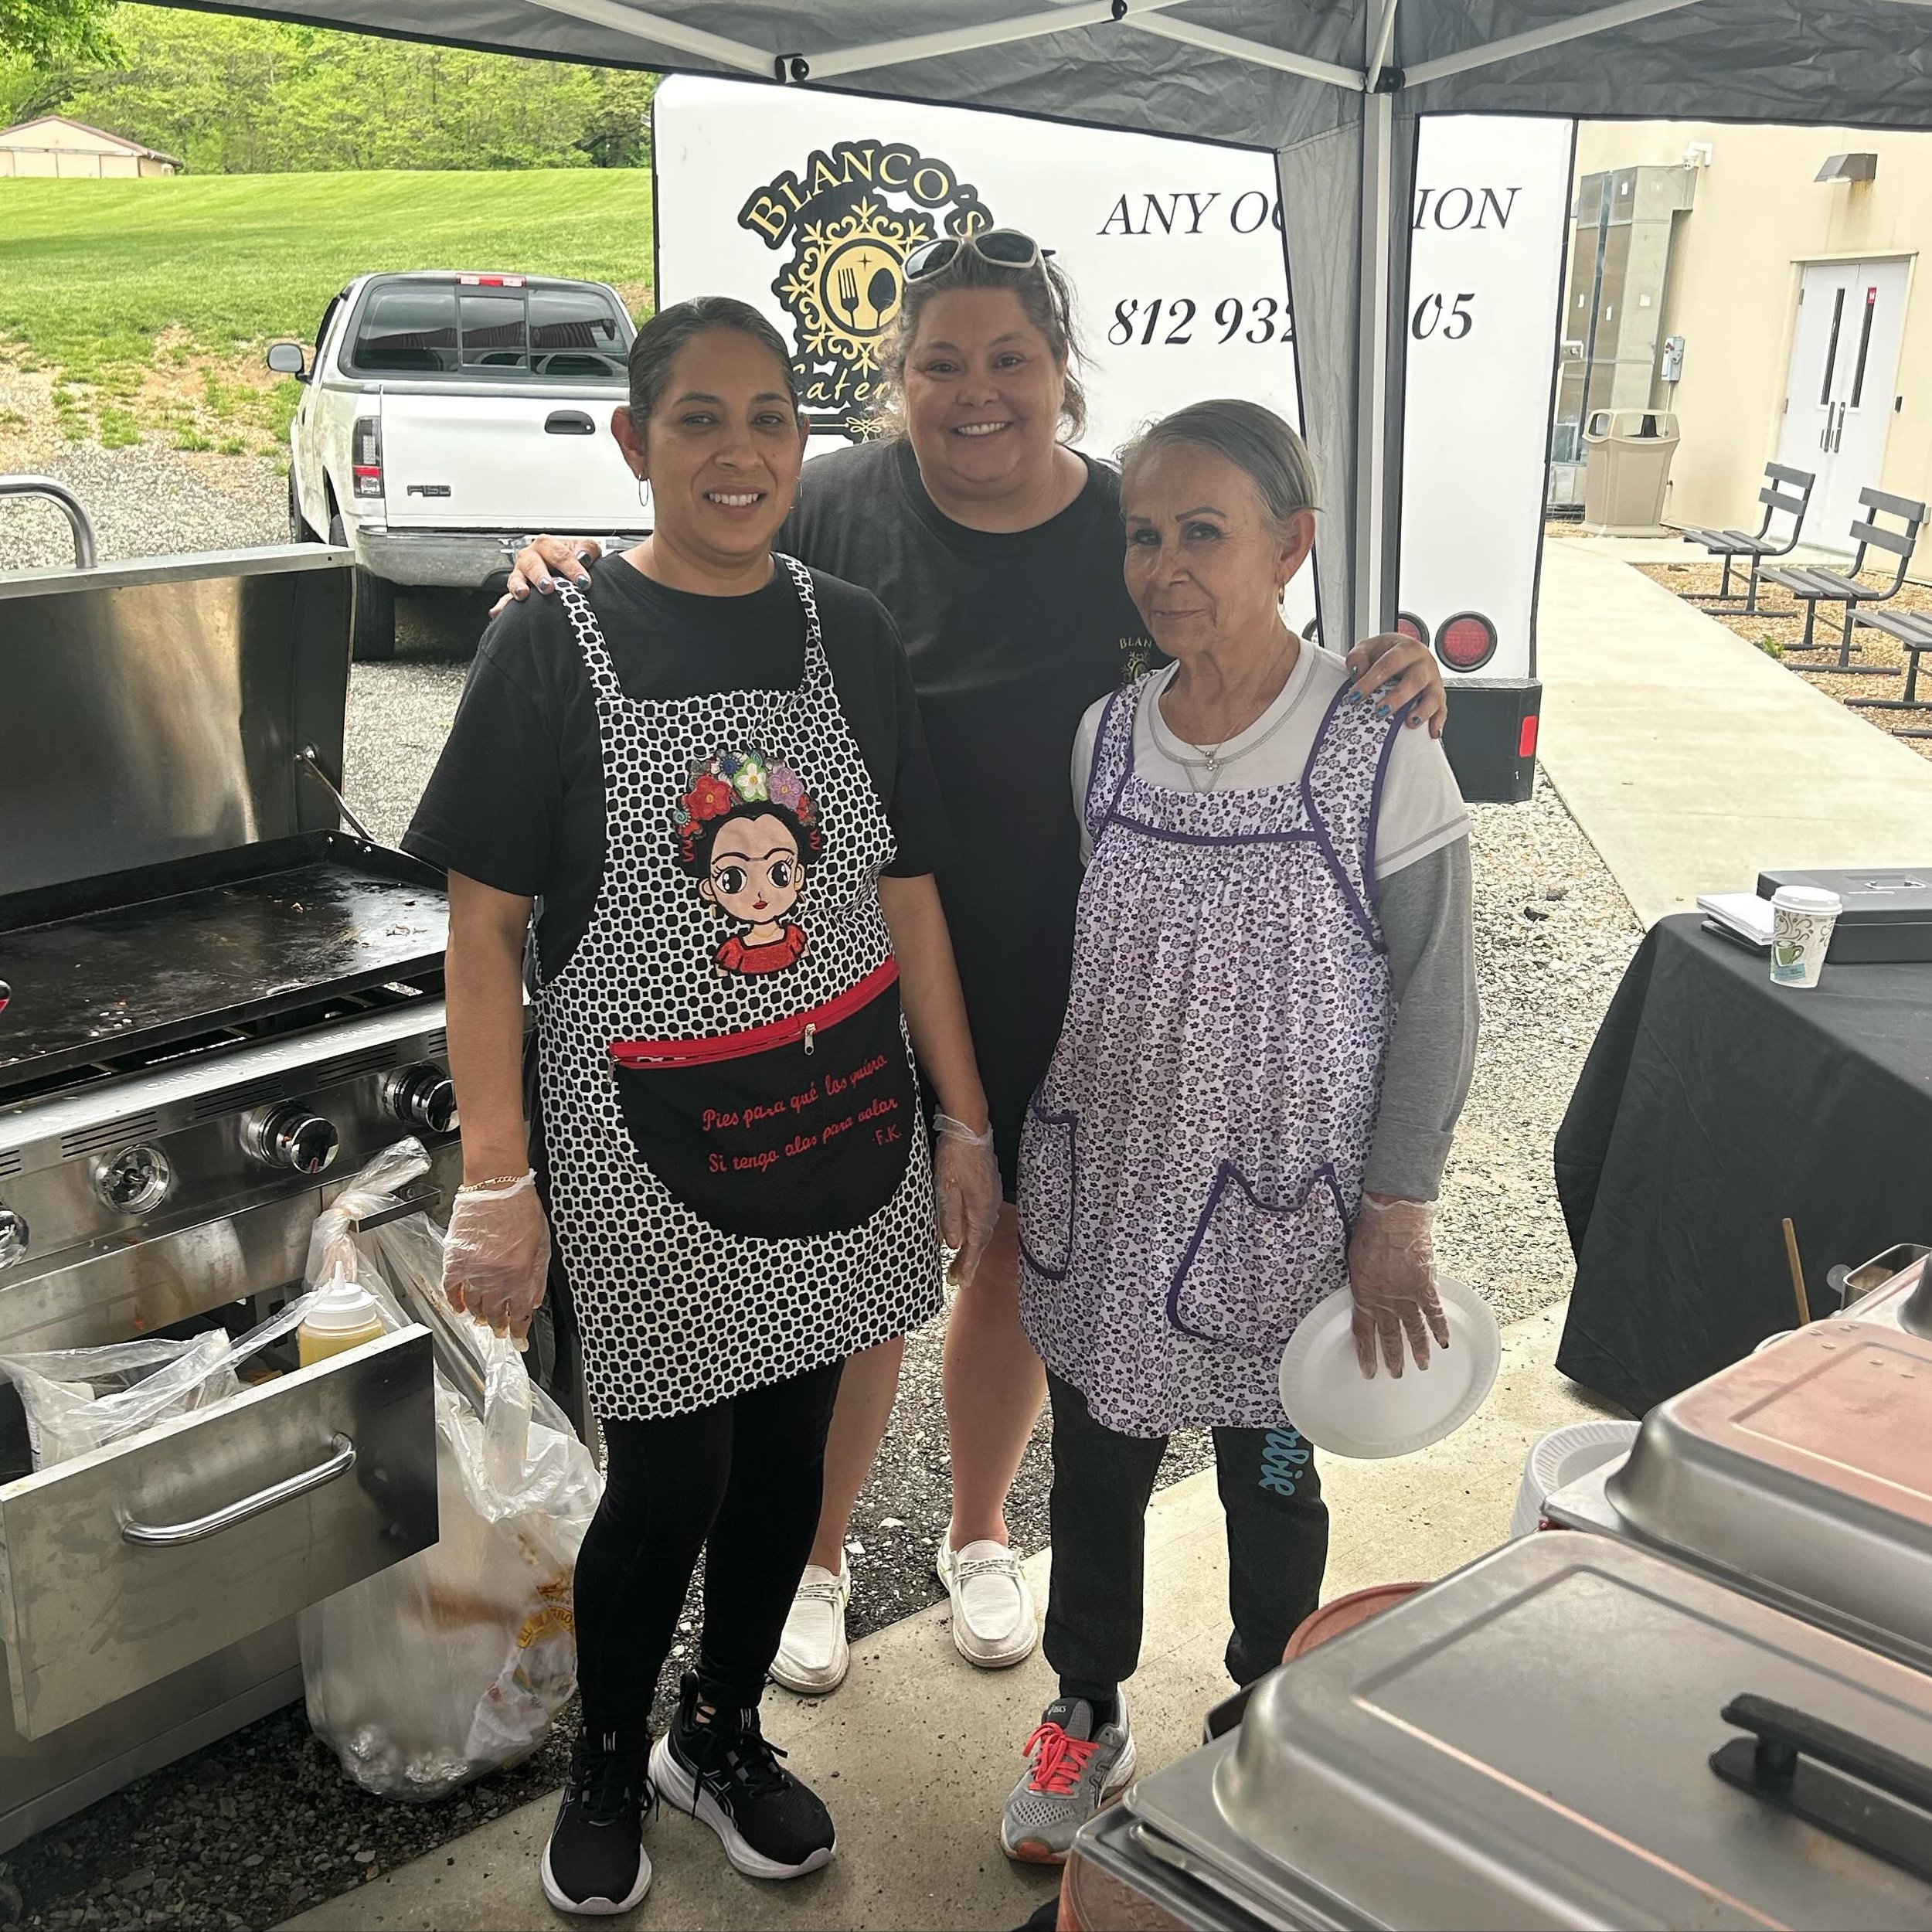 Shoutout to the staff at Blanco&rsquo;s Catering for bringing their food truck and their delicious tacos, quesadillas, and street corn! 

They will be at OA until 6:30pm&mdash;stop by for dinner, the art show, and the spring concert!